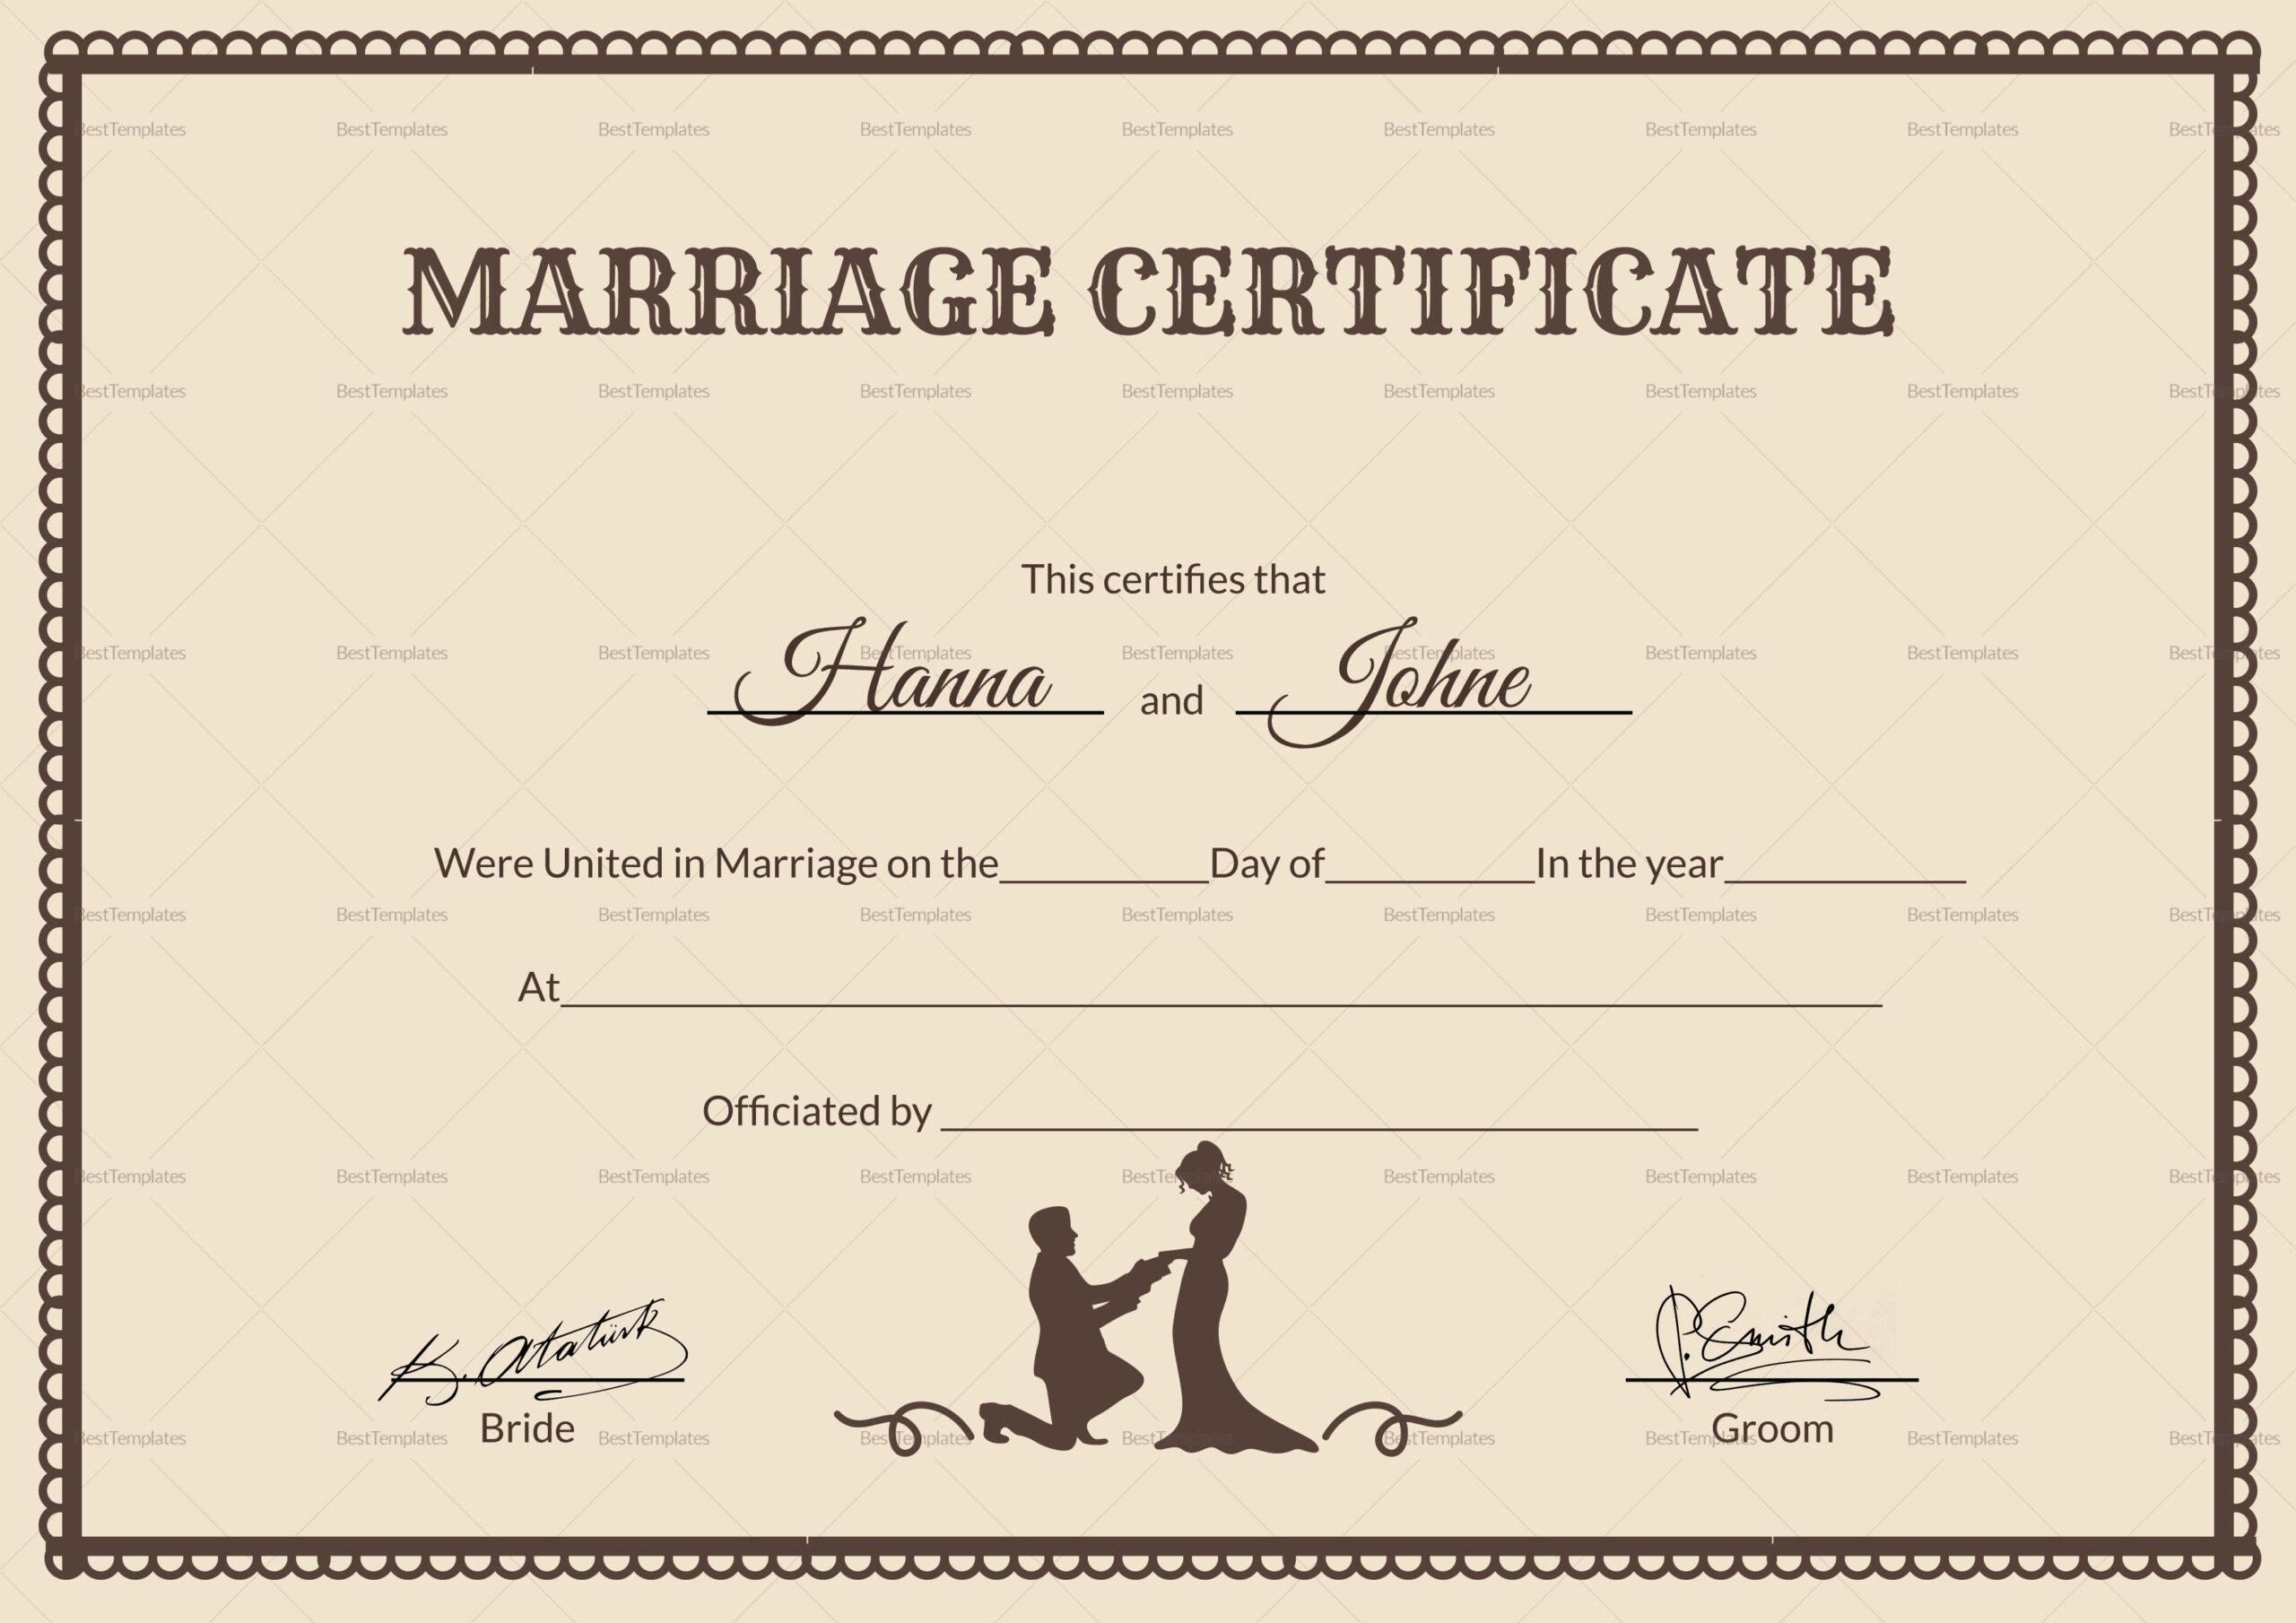 Marriage-Certificate-Template-Editable-Download